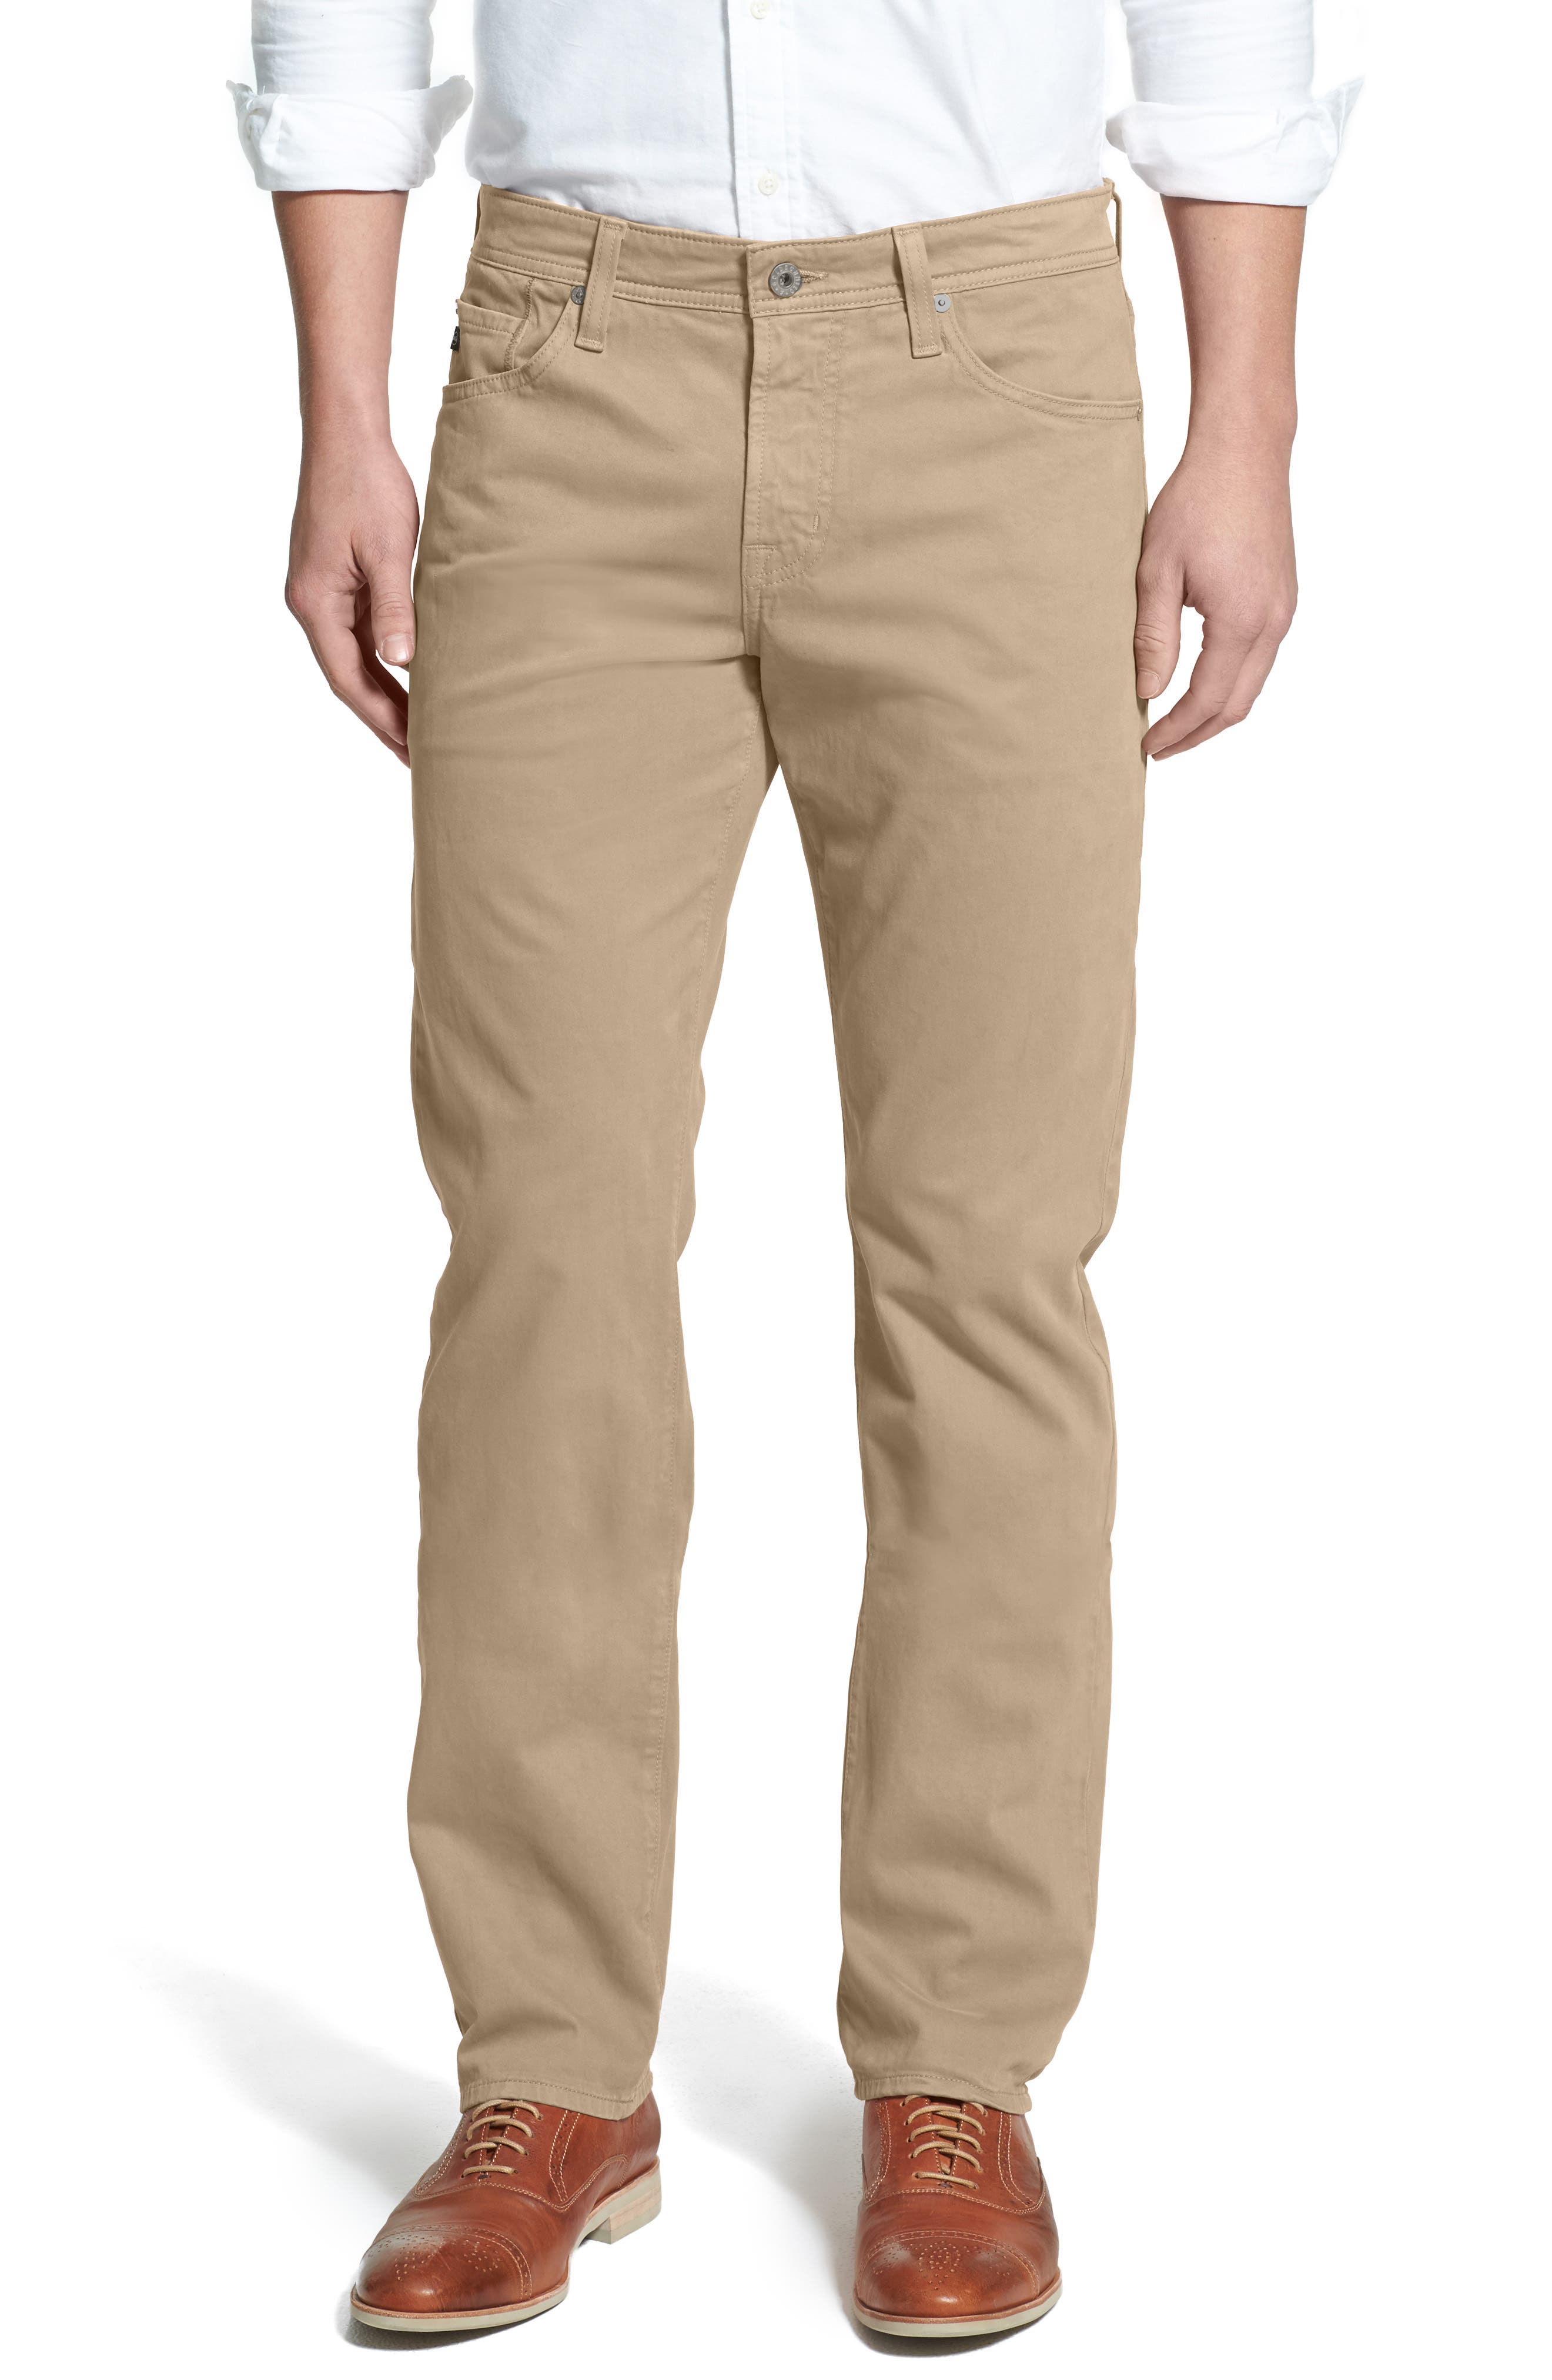 AG Adriano Goldschmied Mens The Graduate Tailored Leg Sud Pant